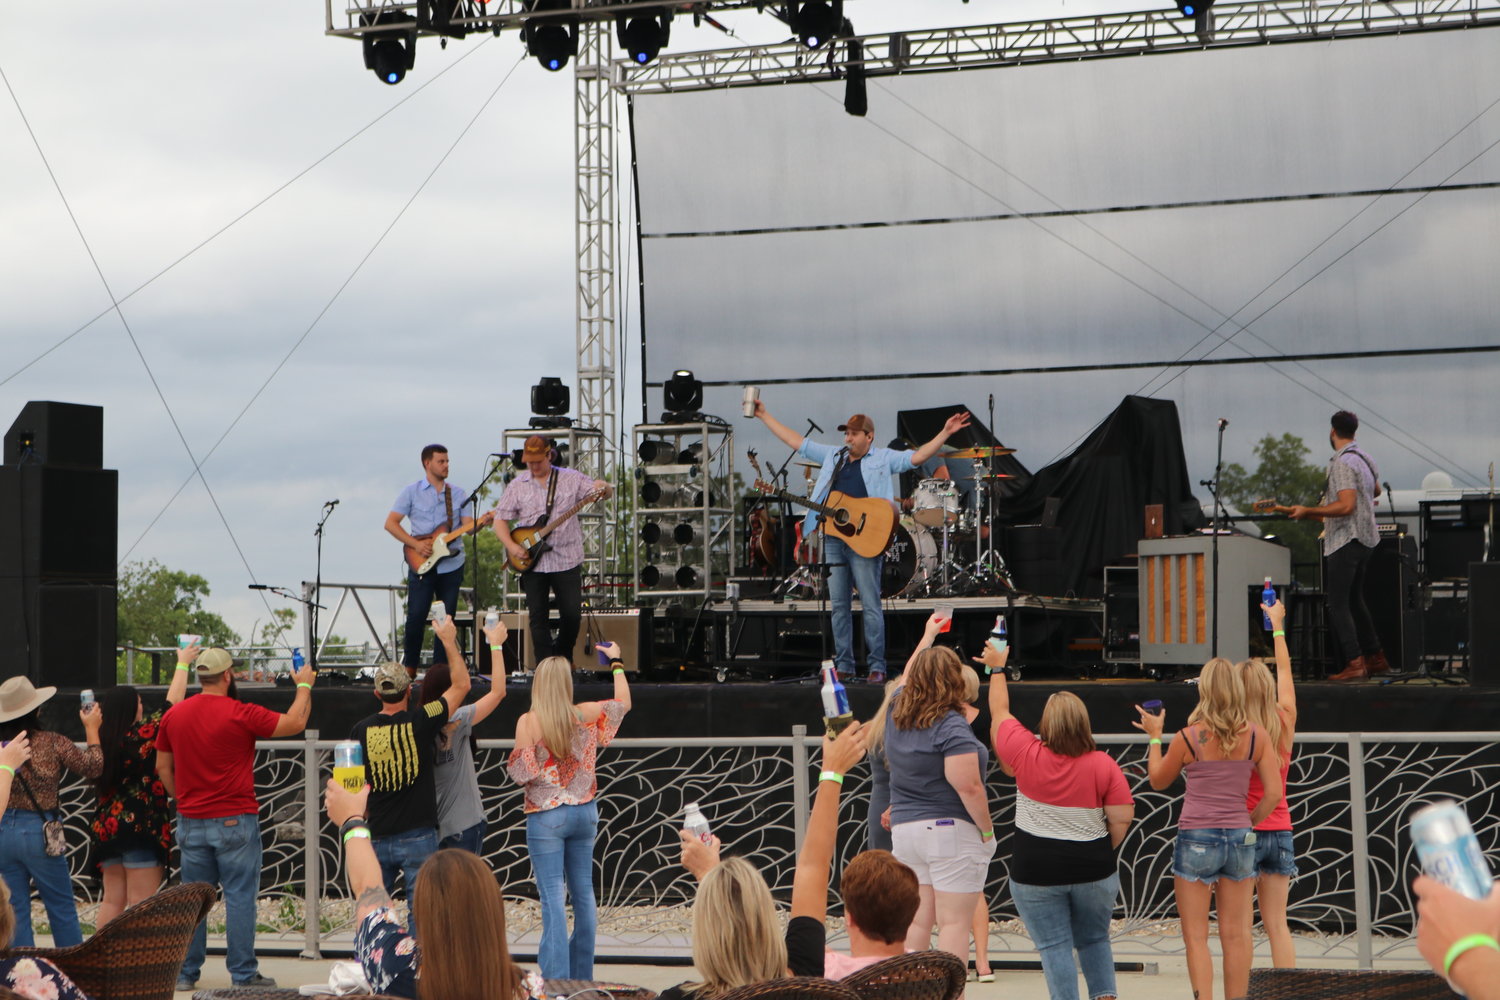 The opening act for Tyler Farr was Central Arkansas band – Midnight South. Pictured left to right are Jeremy Castaldo on bass, J.L. Jones on guitar, Matt Sammons, Drew Smith on Drums and Sam Williams on guitar.